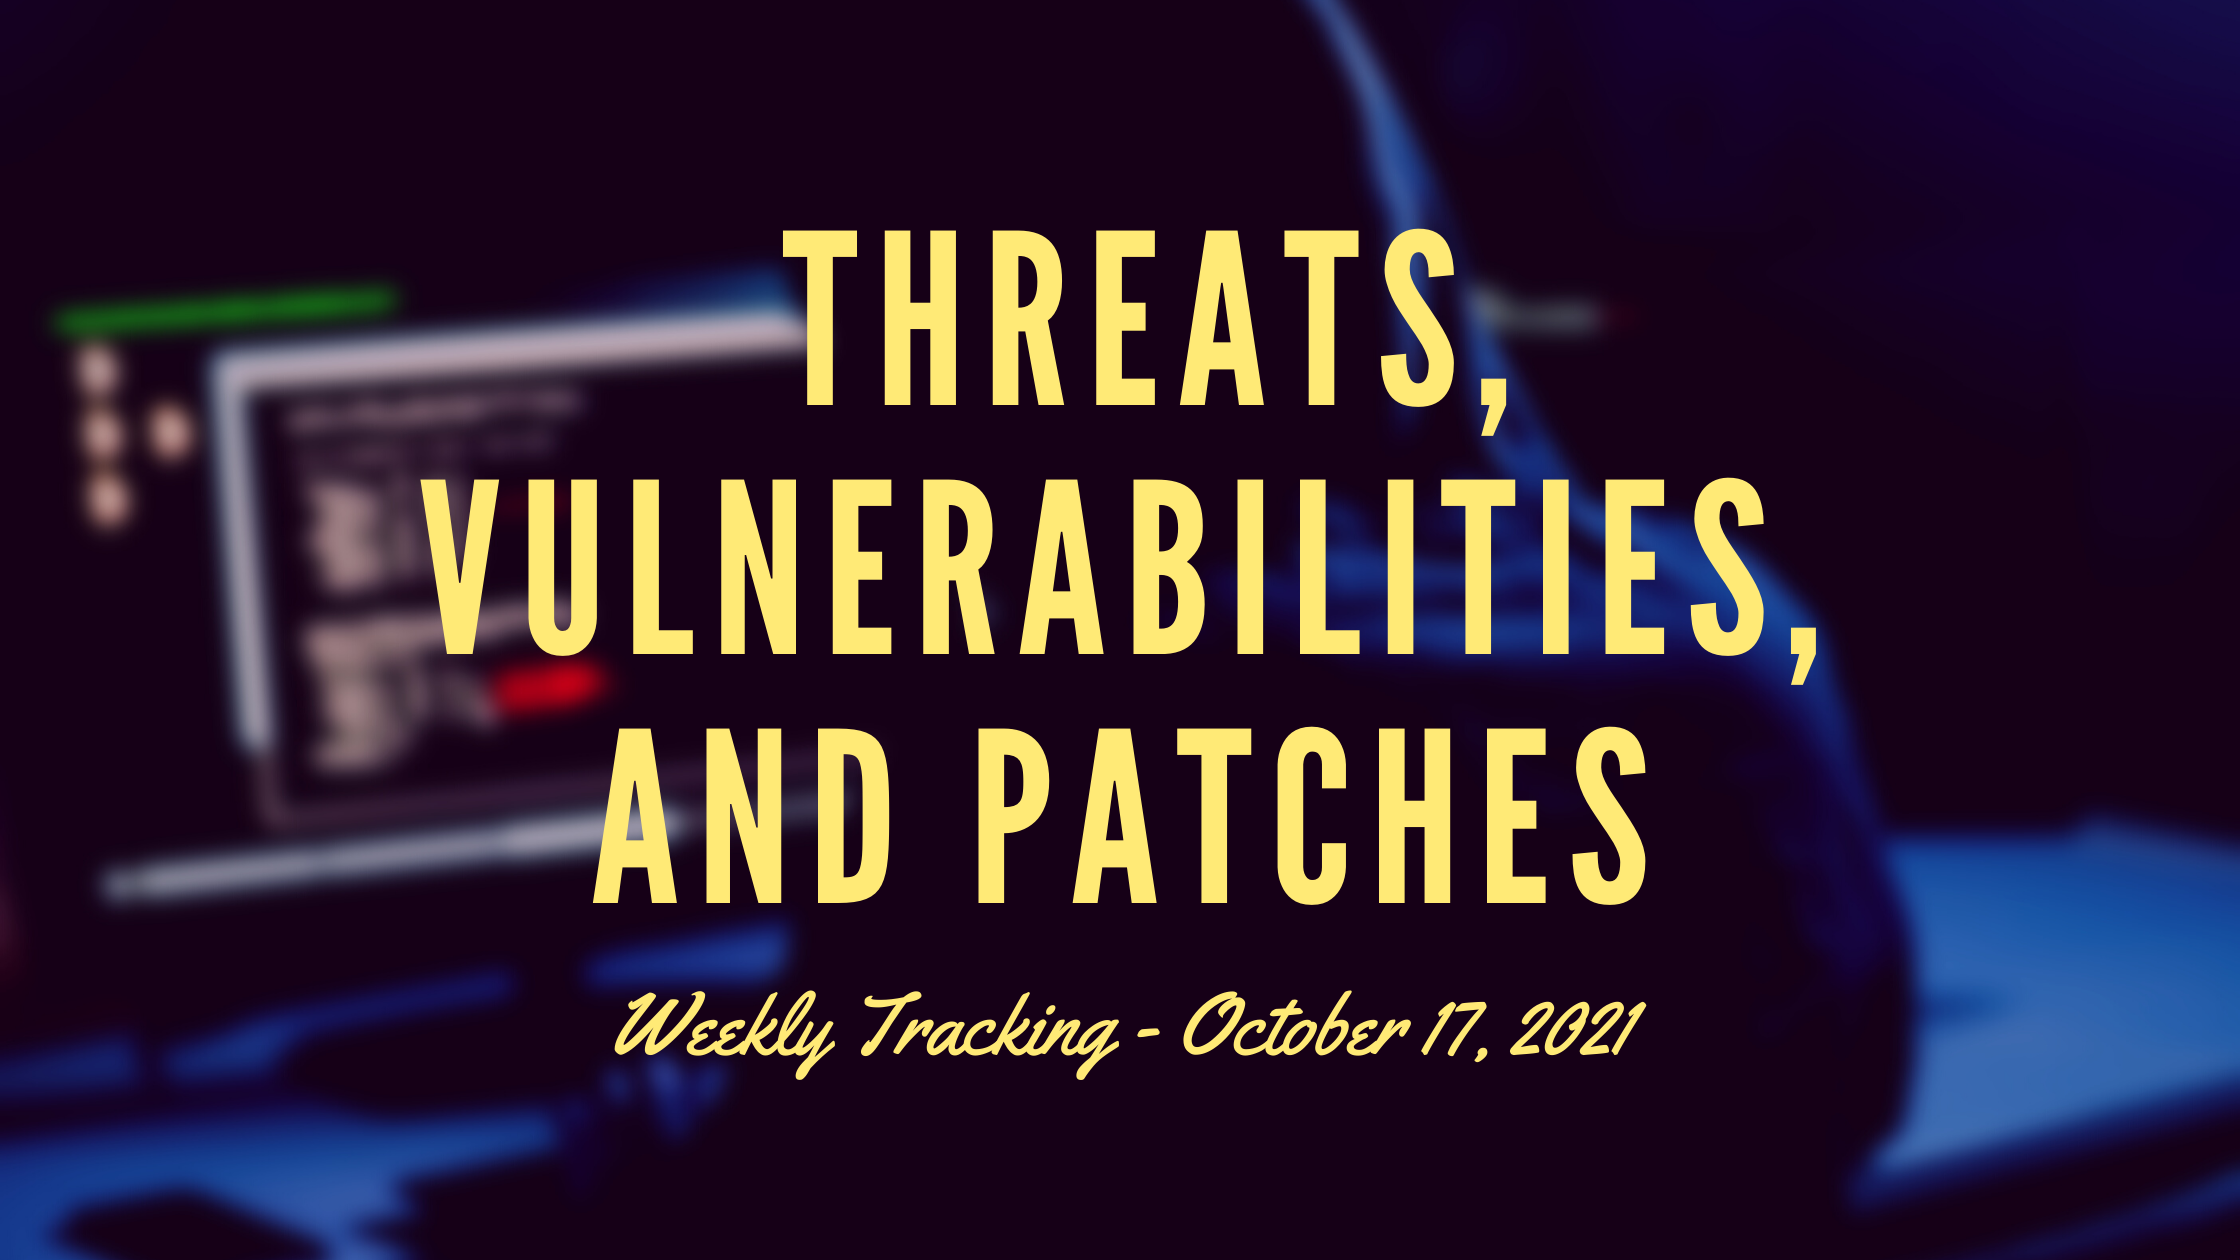 [Security Tip] Weekly Threats, Vulnerabilities, and Patches - Oct 17, 2021